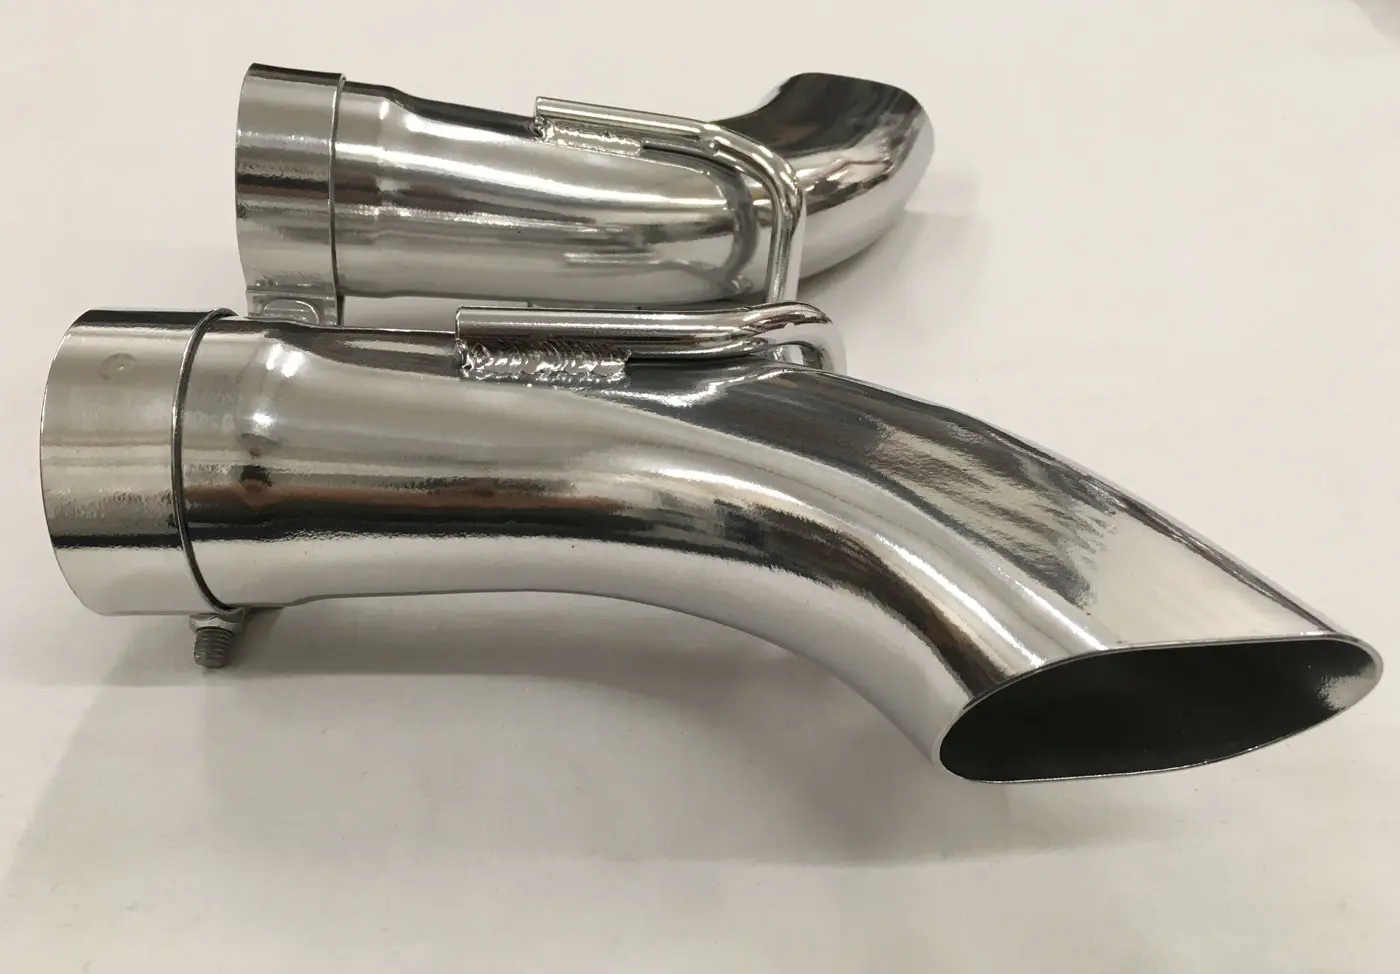 A chrome exhaust pipe sitting on top of a white table.